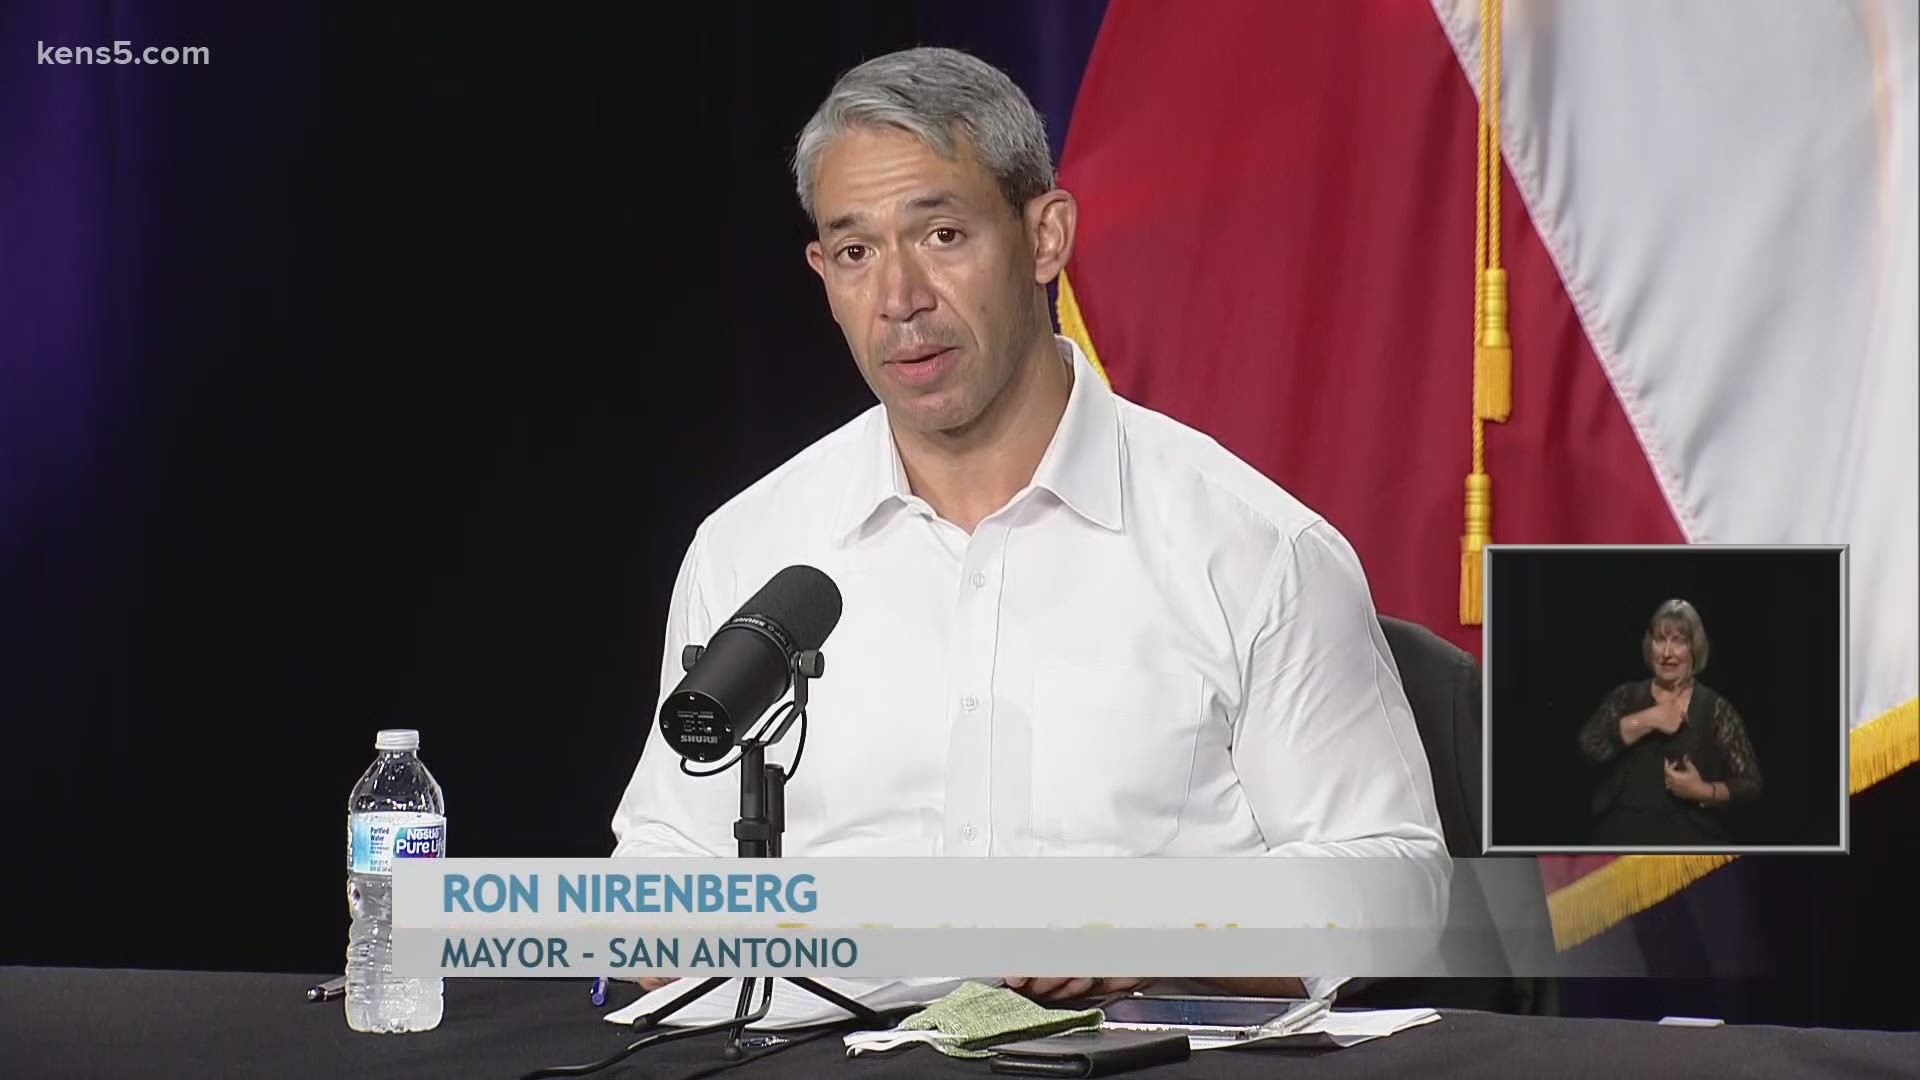 With the Labor Day weekend about to start, Mayor Ron Nirenberg said this is "one of the several defining moments in our fight against COVID-19."